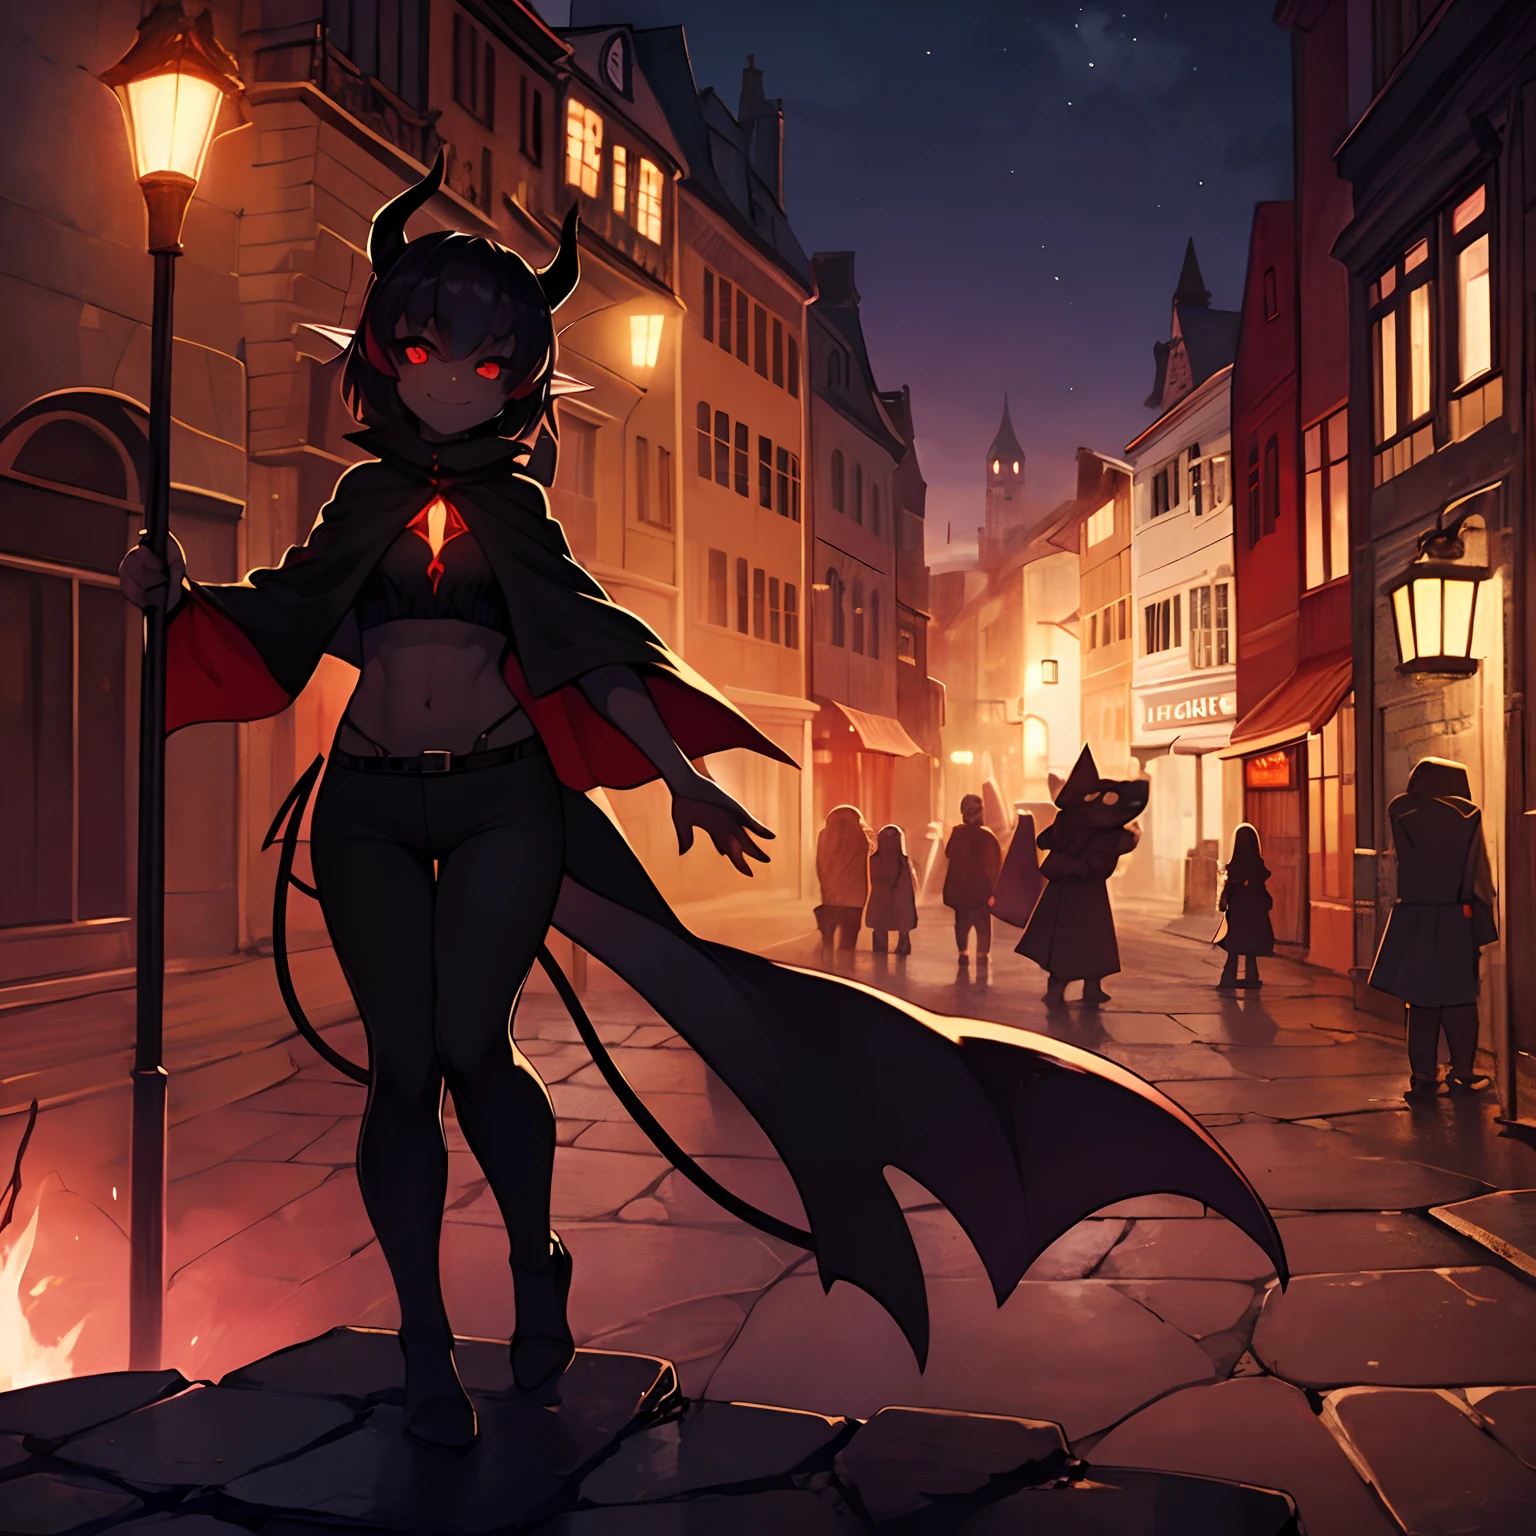 In a creepy medieval city at night time, a small demon girl with red eyes, short black demon horns, long demon tail, long black hair, and dark skin stands alone. She is wearing a black cape, black shirt, midriff, and black pants, a dark red mystical aura is coming off of her body. She has a sly smile.